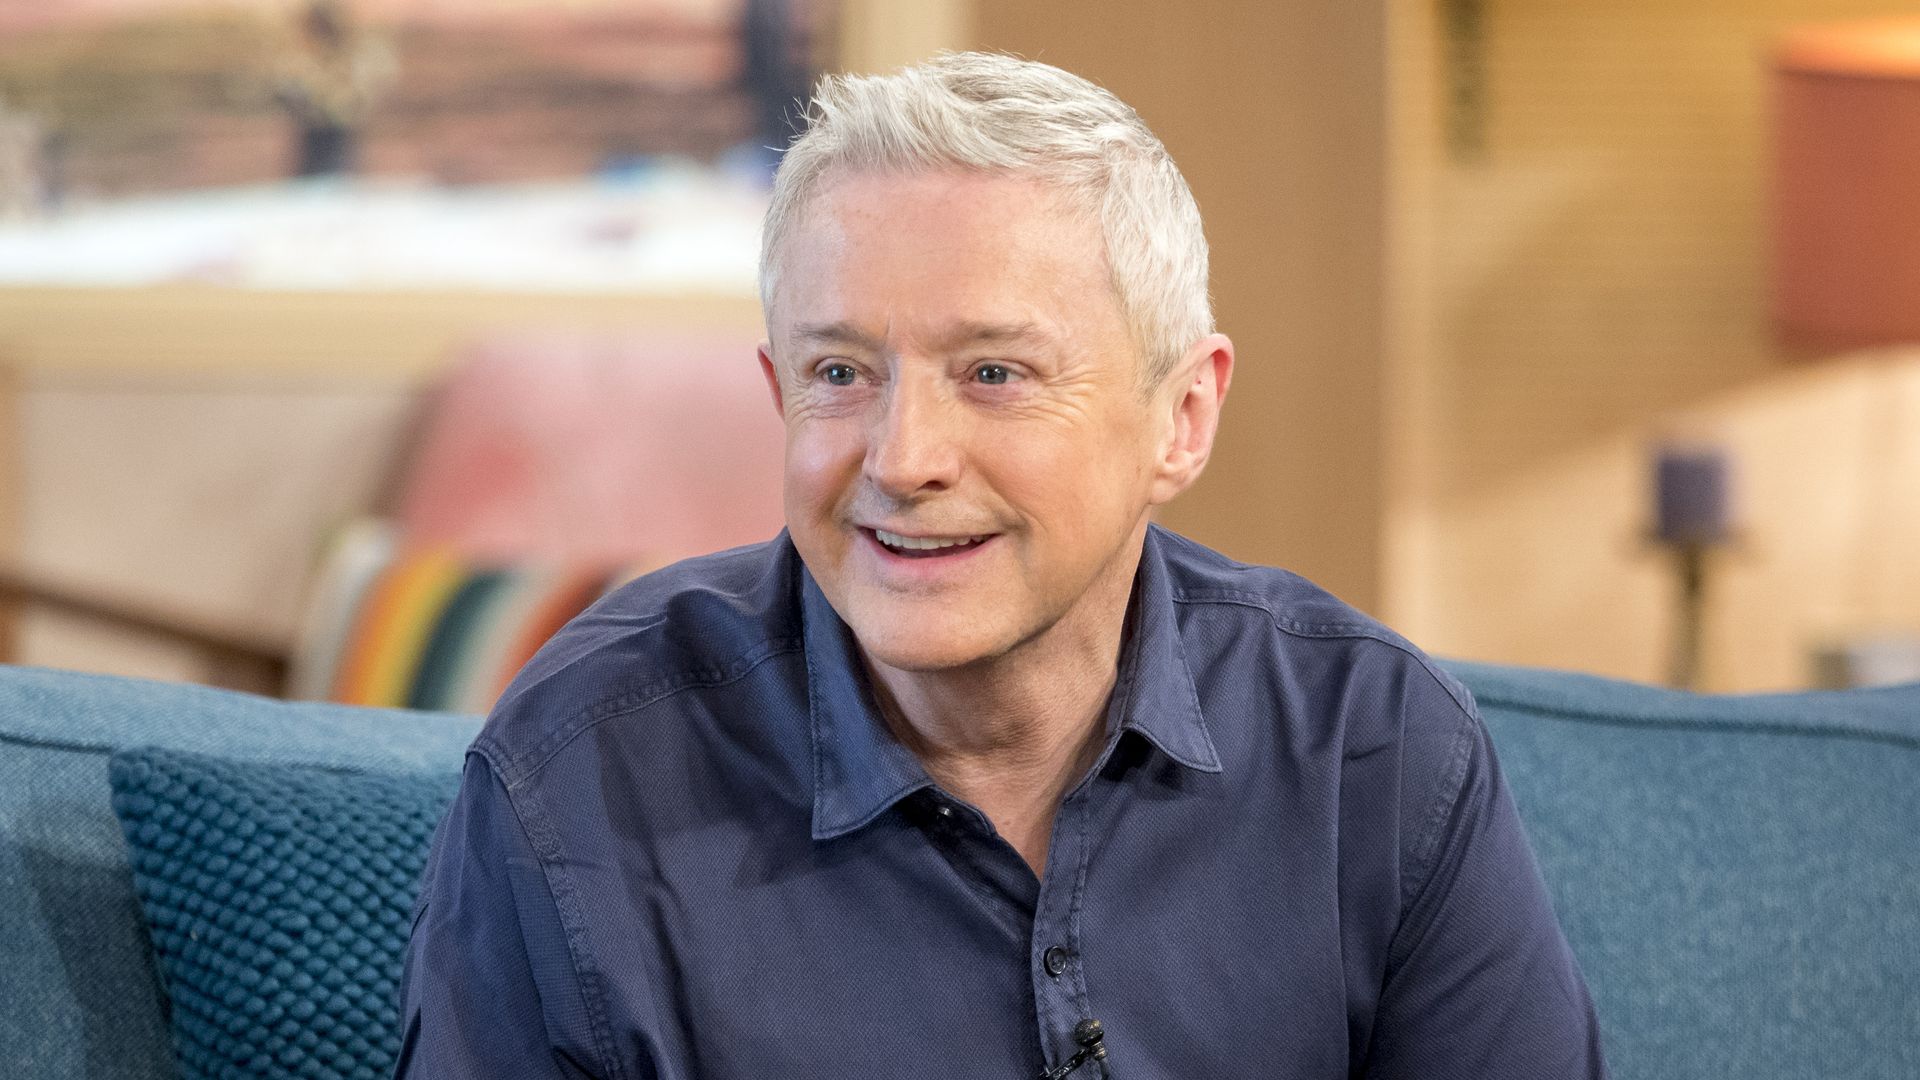 Louis Walsh on 'This Morning' in 2017